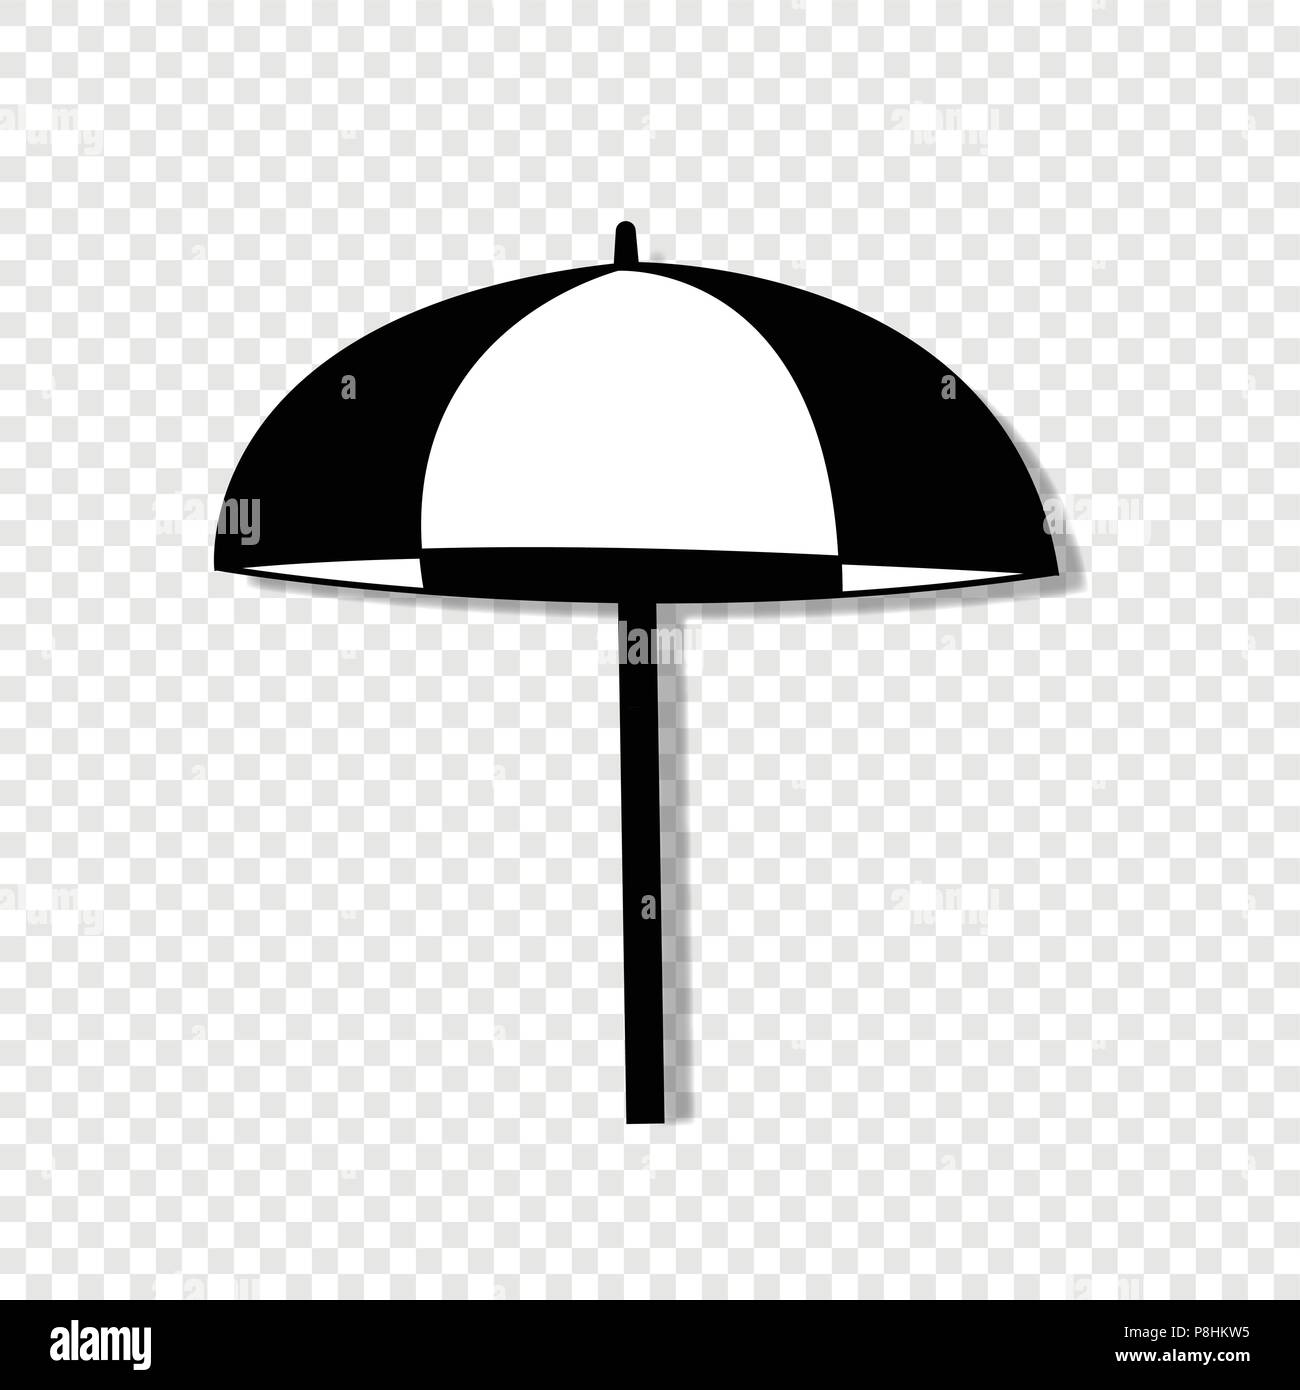 Vector black and white silhouette illustration of beach striped umbrella side view icon isolated on transparent background. Stock Vector